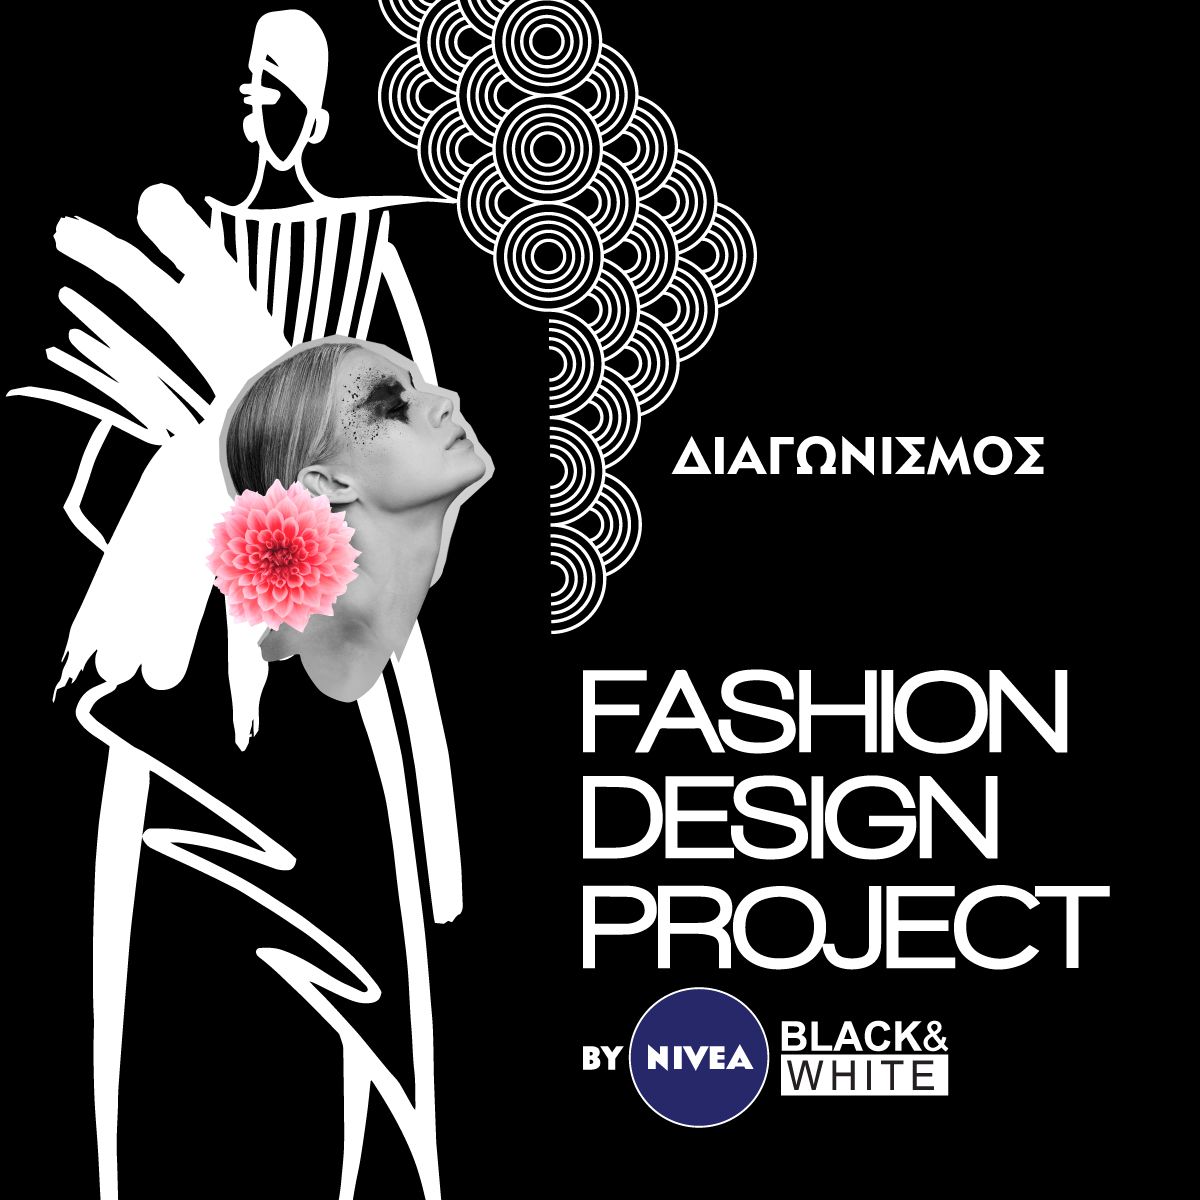 admin ajax.php?action=kernel&p=image&src=%7B%22file%22%3A%22wp content%2Fuploads%2F2020%2F11%2Fimages easyblog articles 11743 Fashion Design Project by NIVEA Black and White key visual